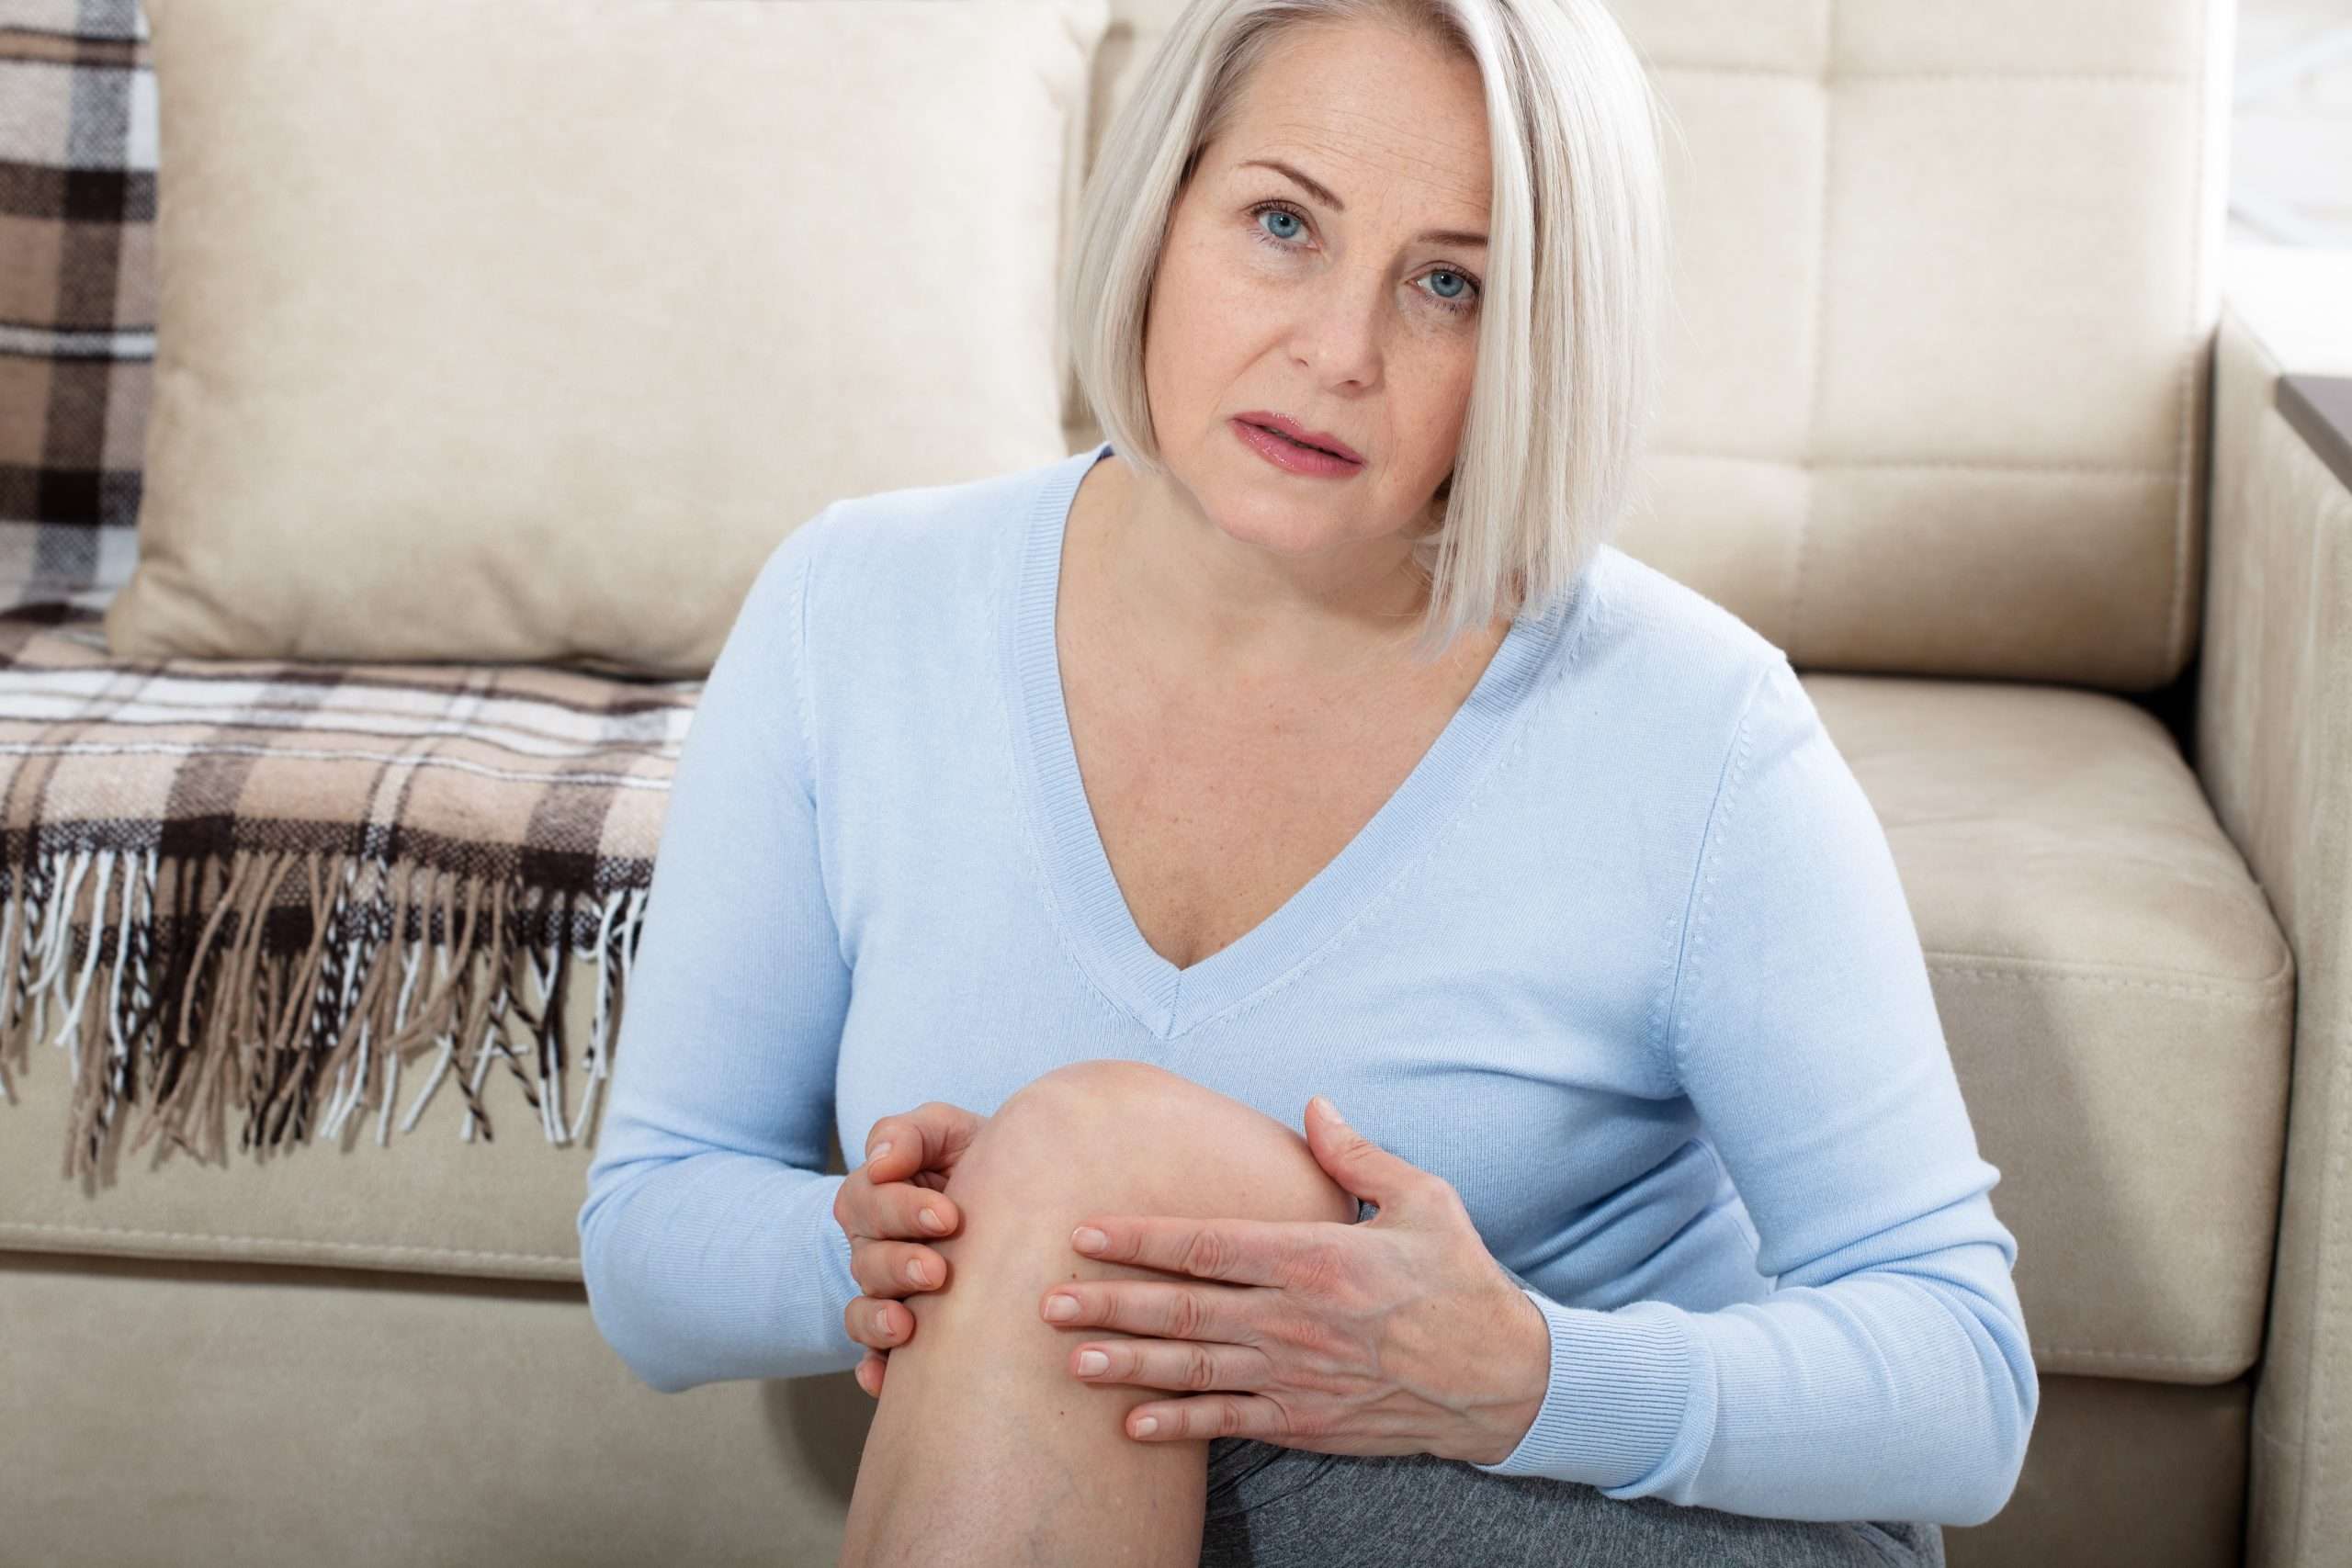 Can Ovarian Cancer Cause Numbness in a Leg? Â» Scary Symptoms